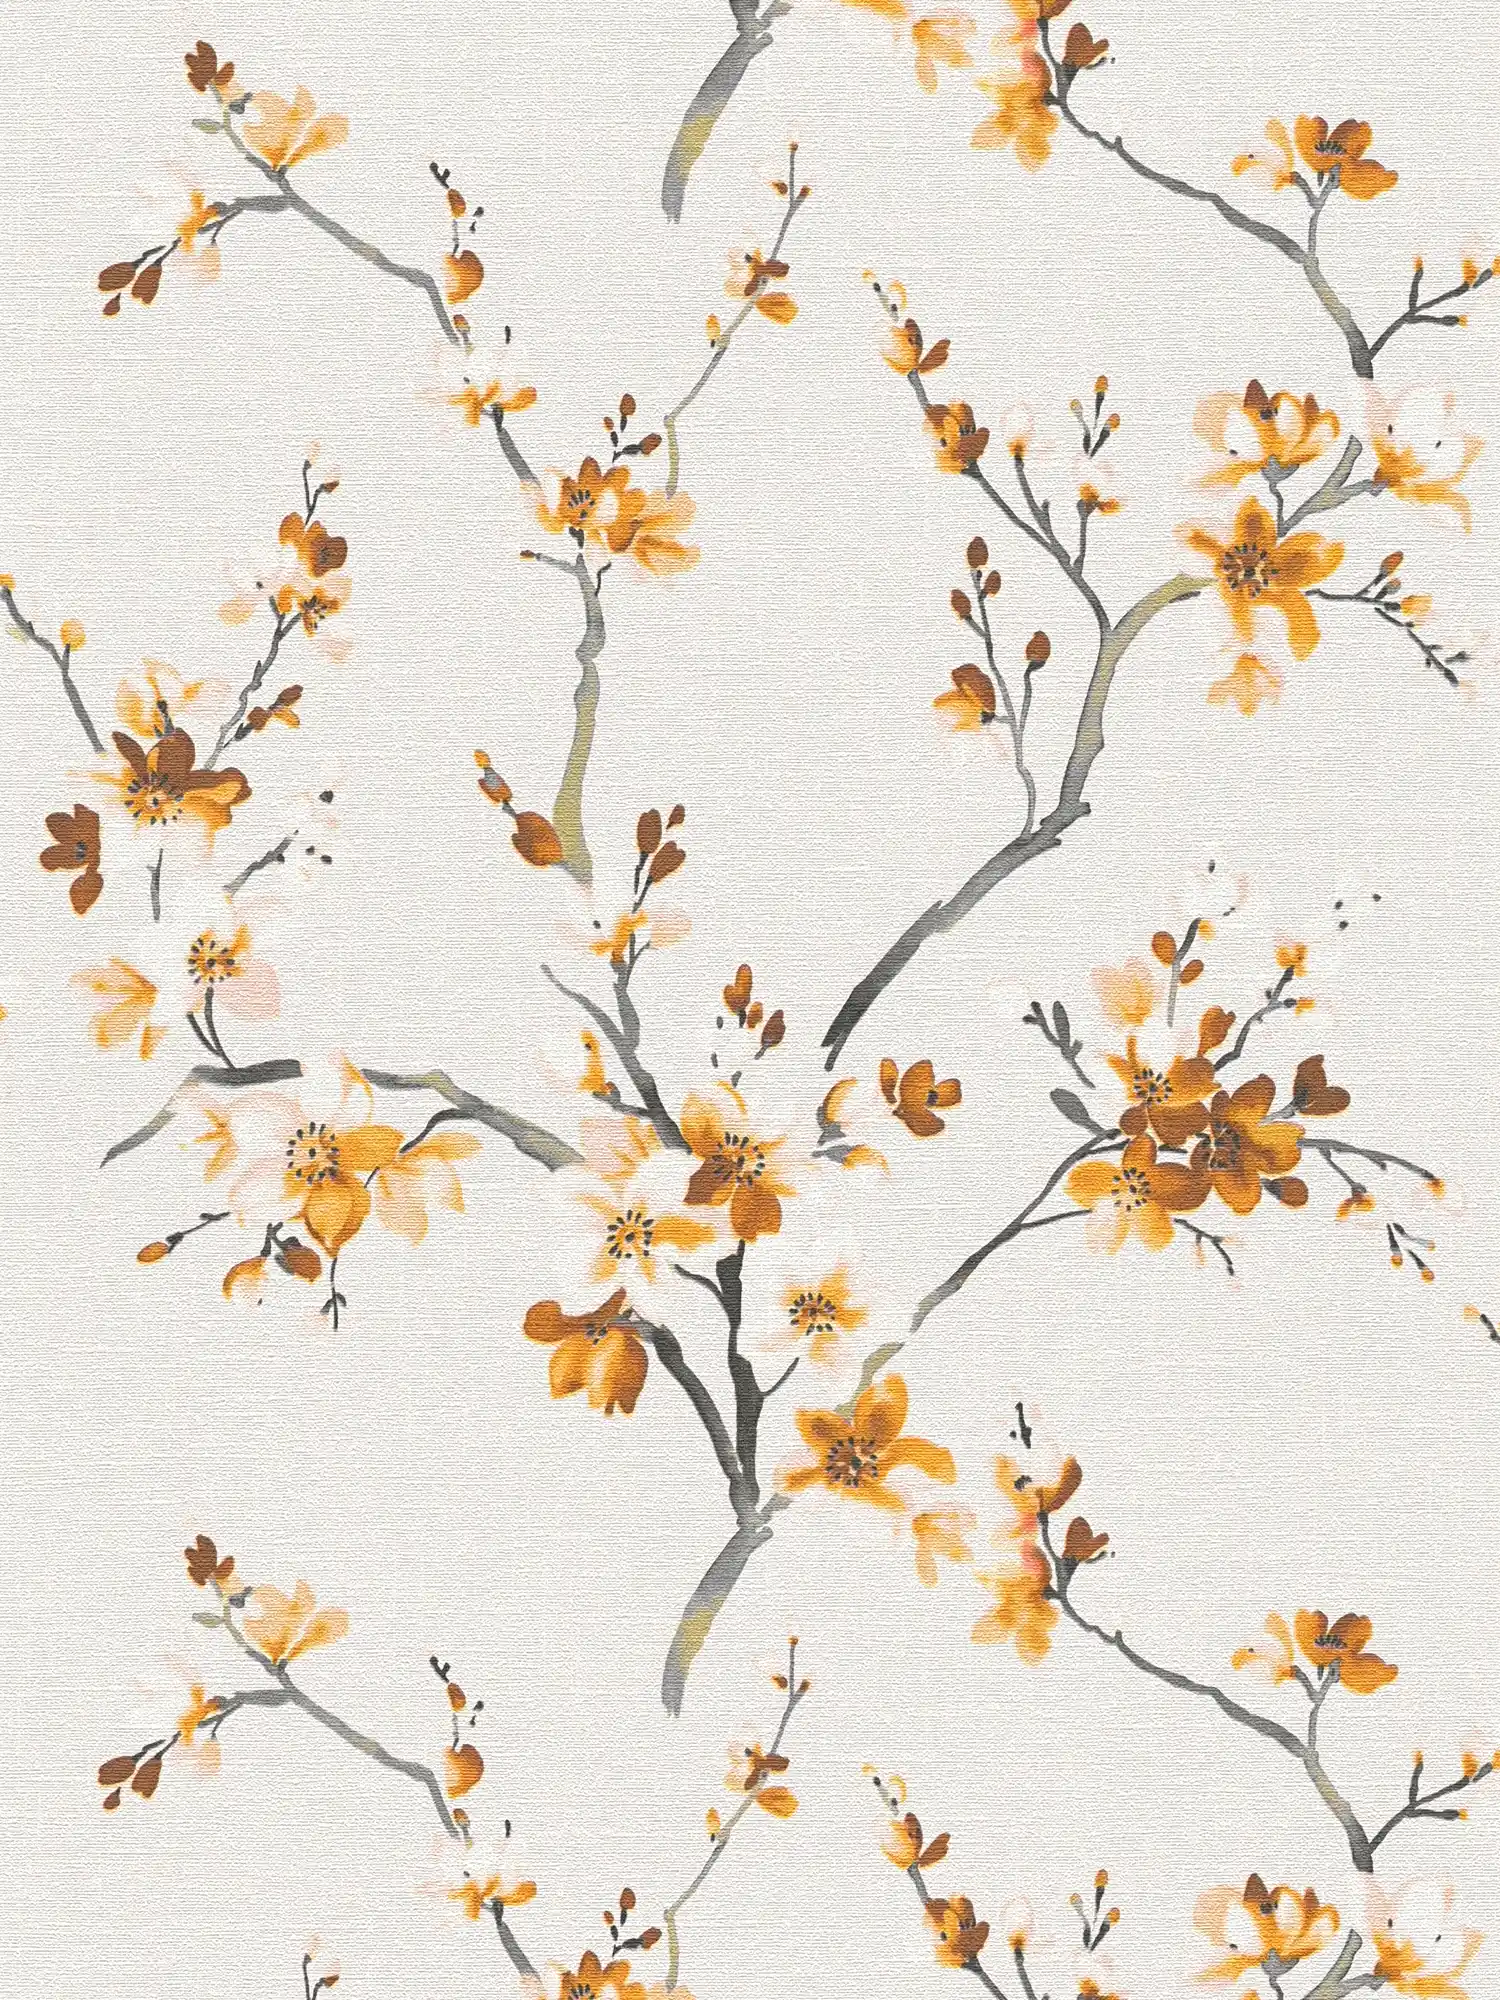 Floral wallpaper mustard yellow floral pattern in watercolour style
